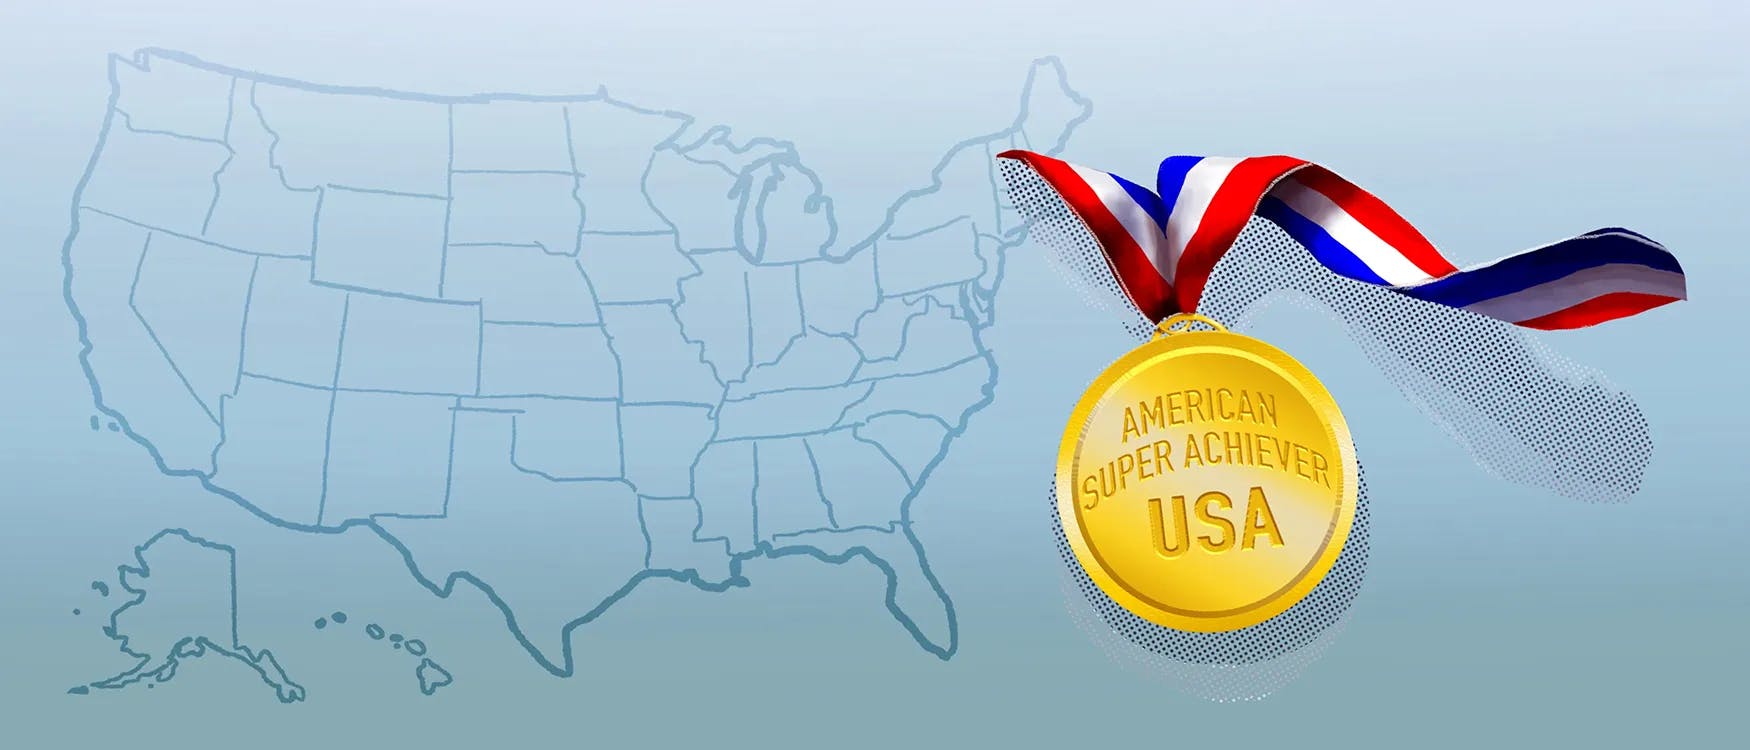 American Super-achievers background image